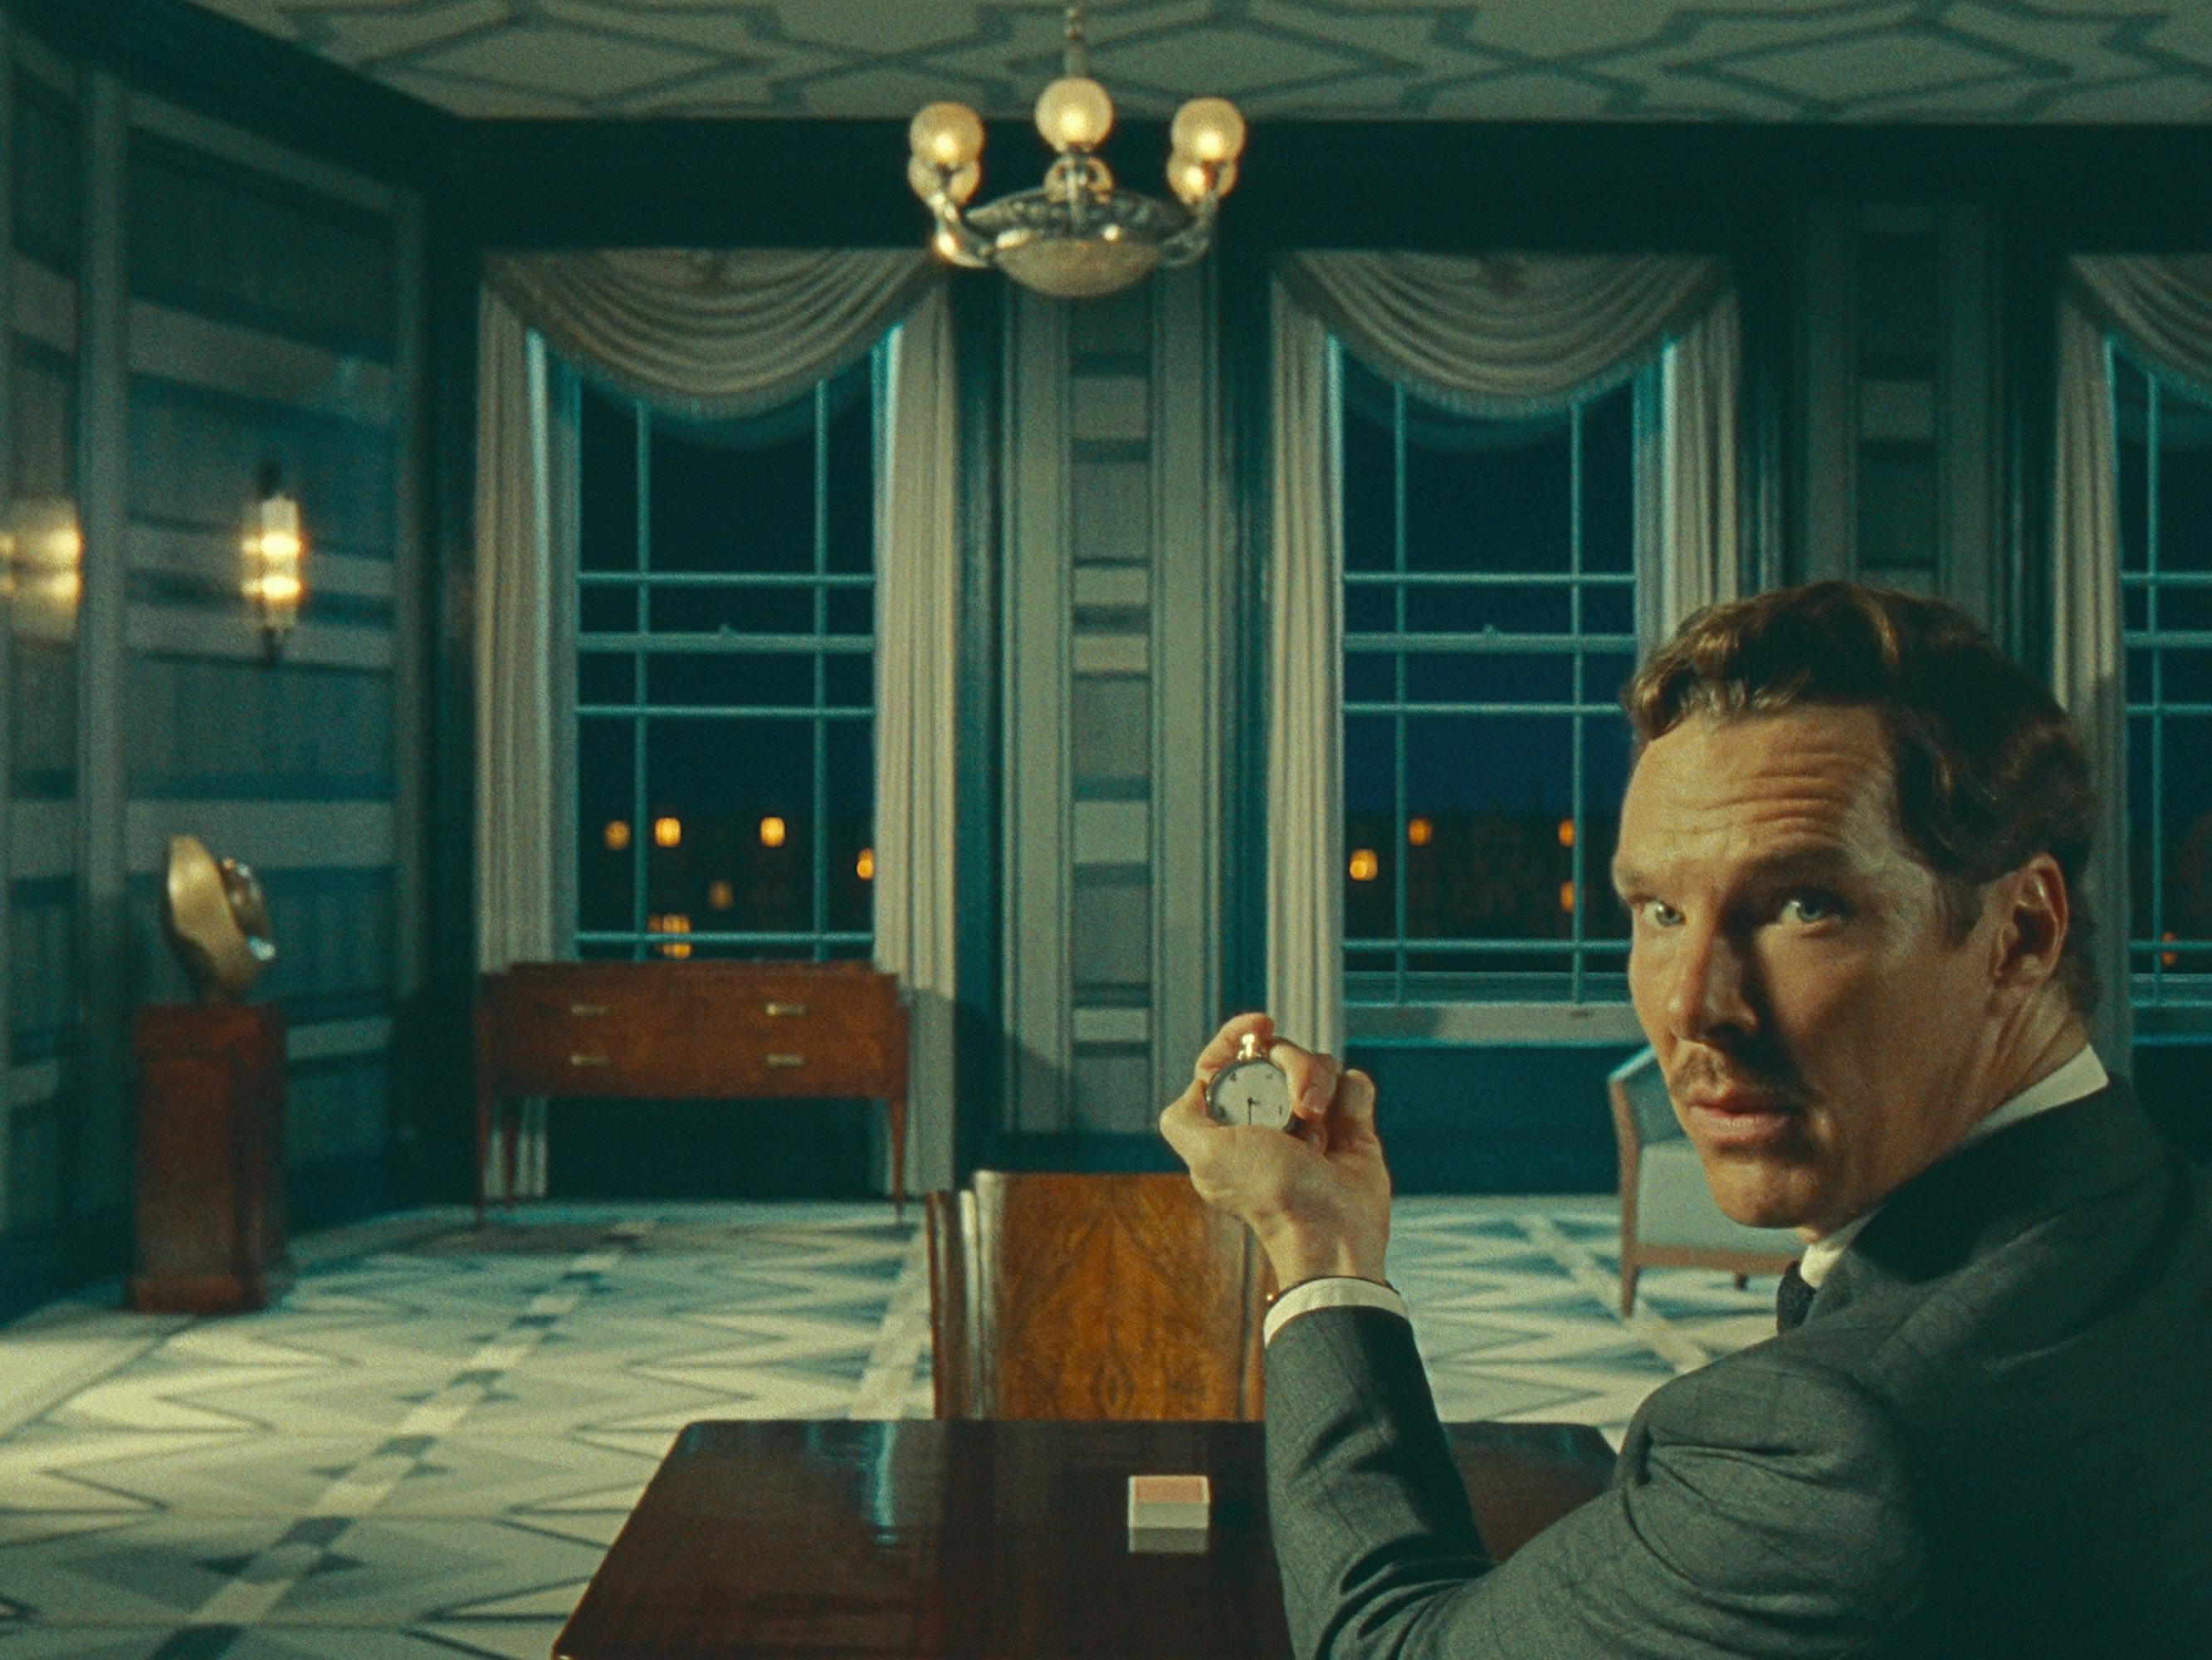 Henry Sugar (Benedict Cumberbatch) holds up a stopwatch in a blue, ornate room.